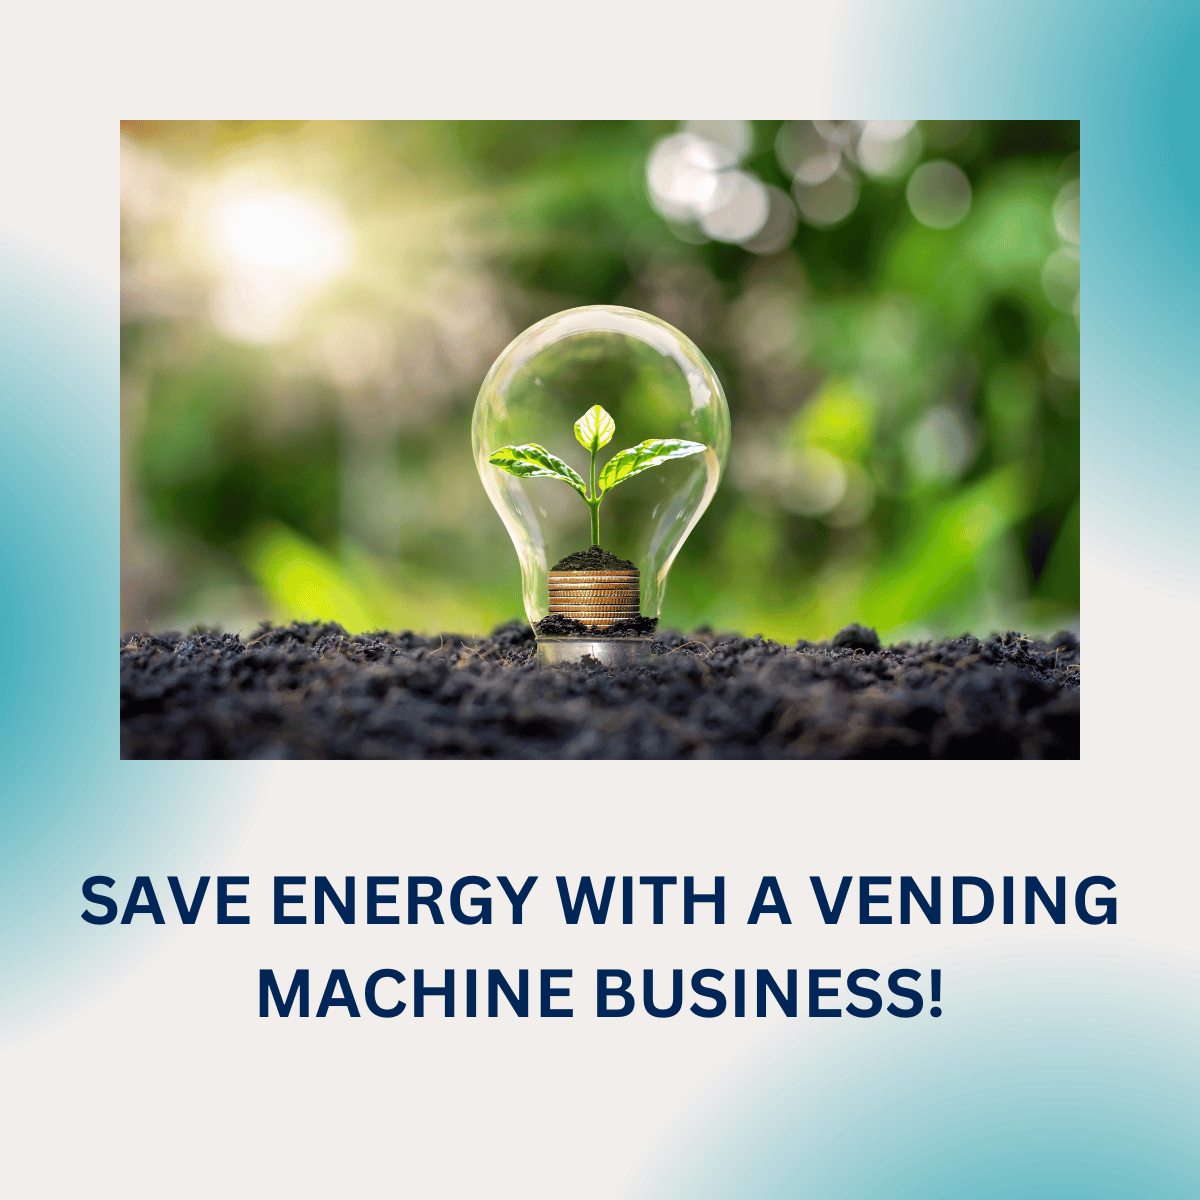 SAVE ENERGY WITH A VENDING MACHINE BUSINESS!